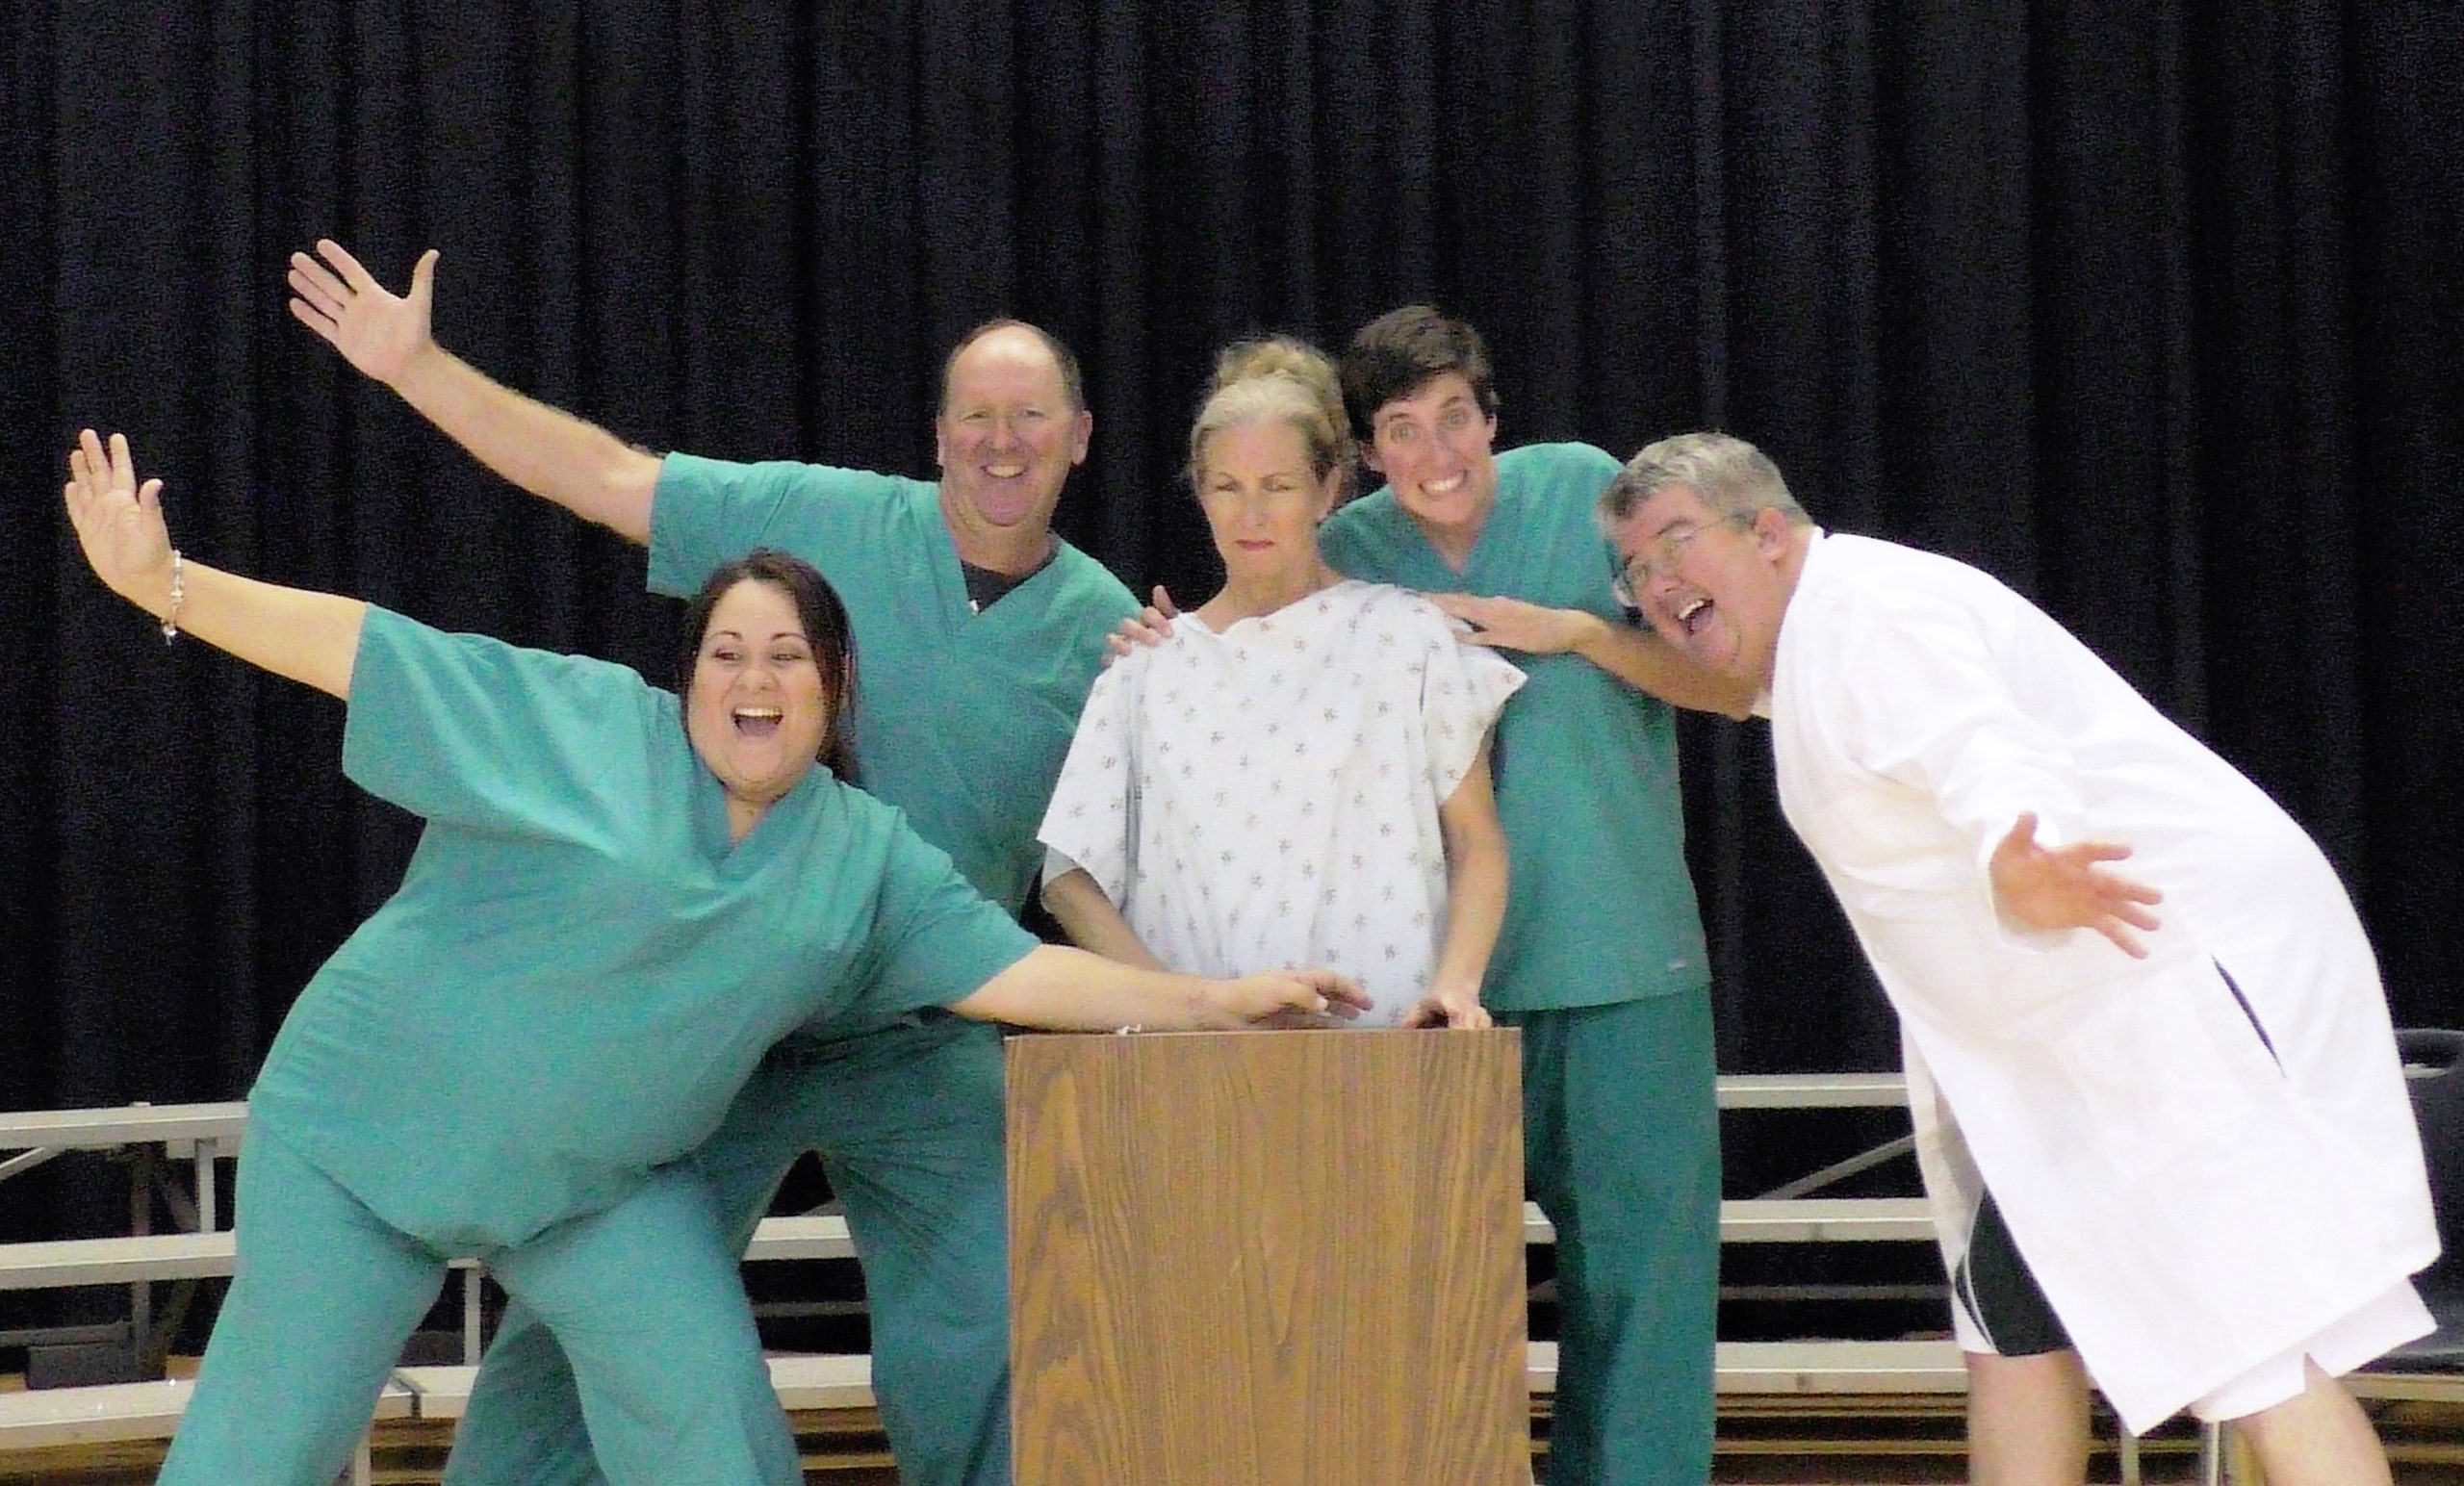 Photo of cast members in scrubs and one in the center in a hospital gown